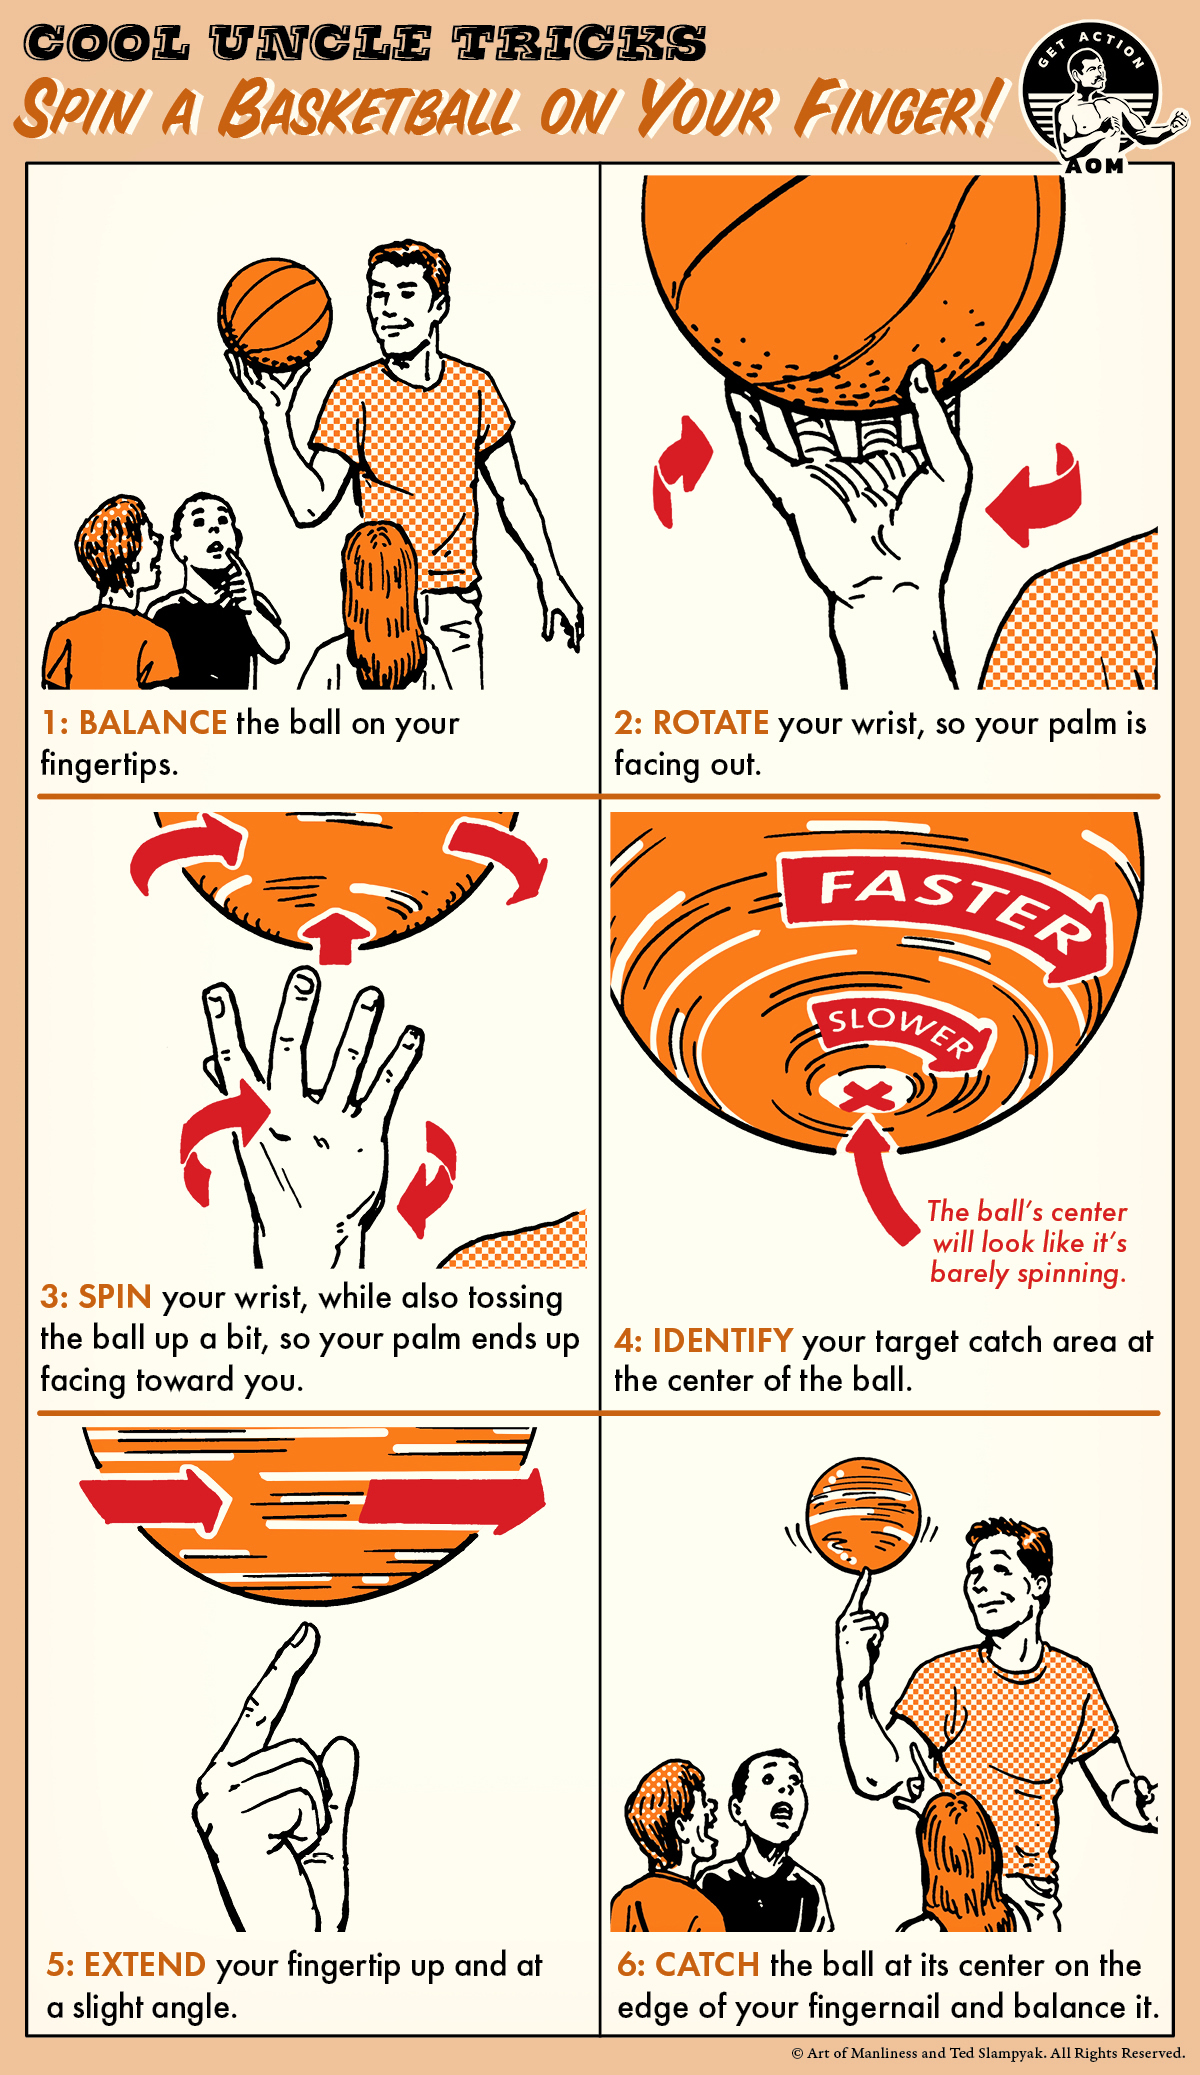 Comic guide how to spin a basketball in fingers.